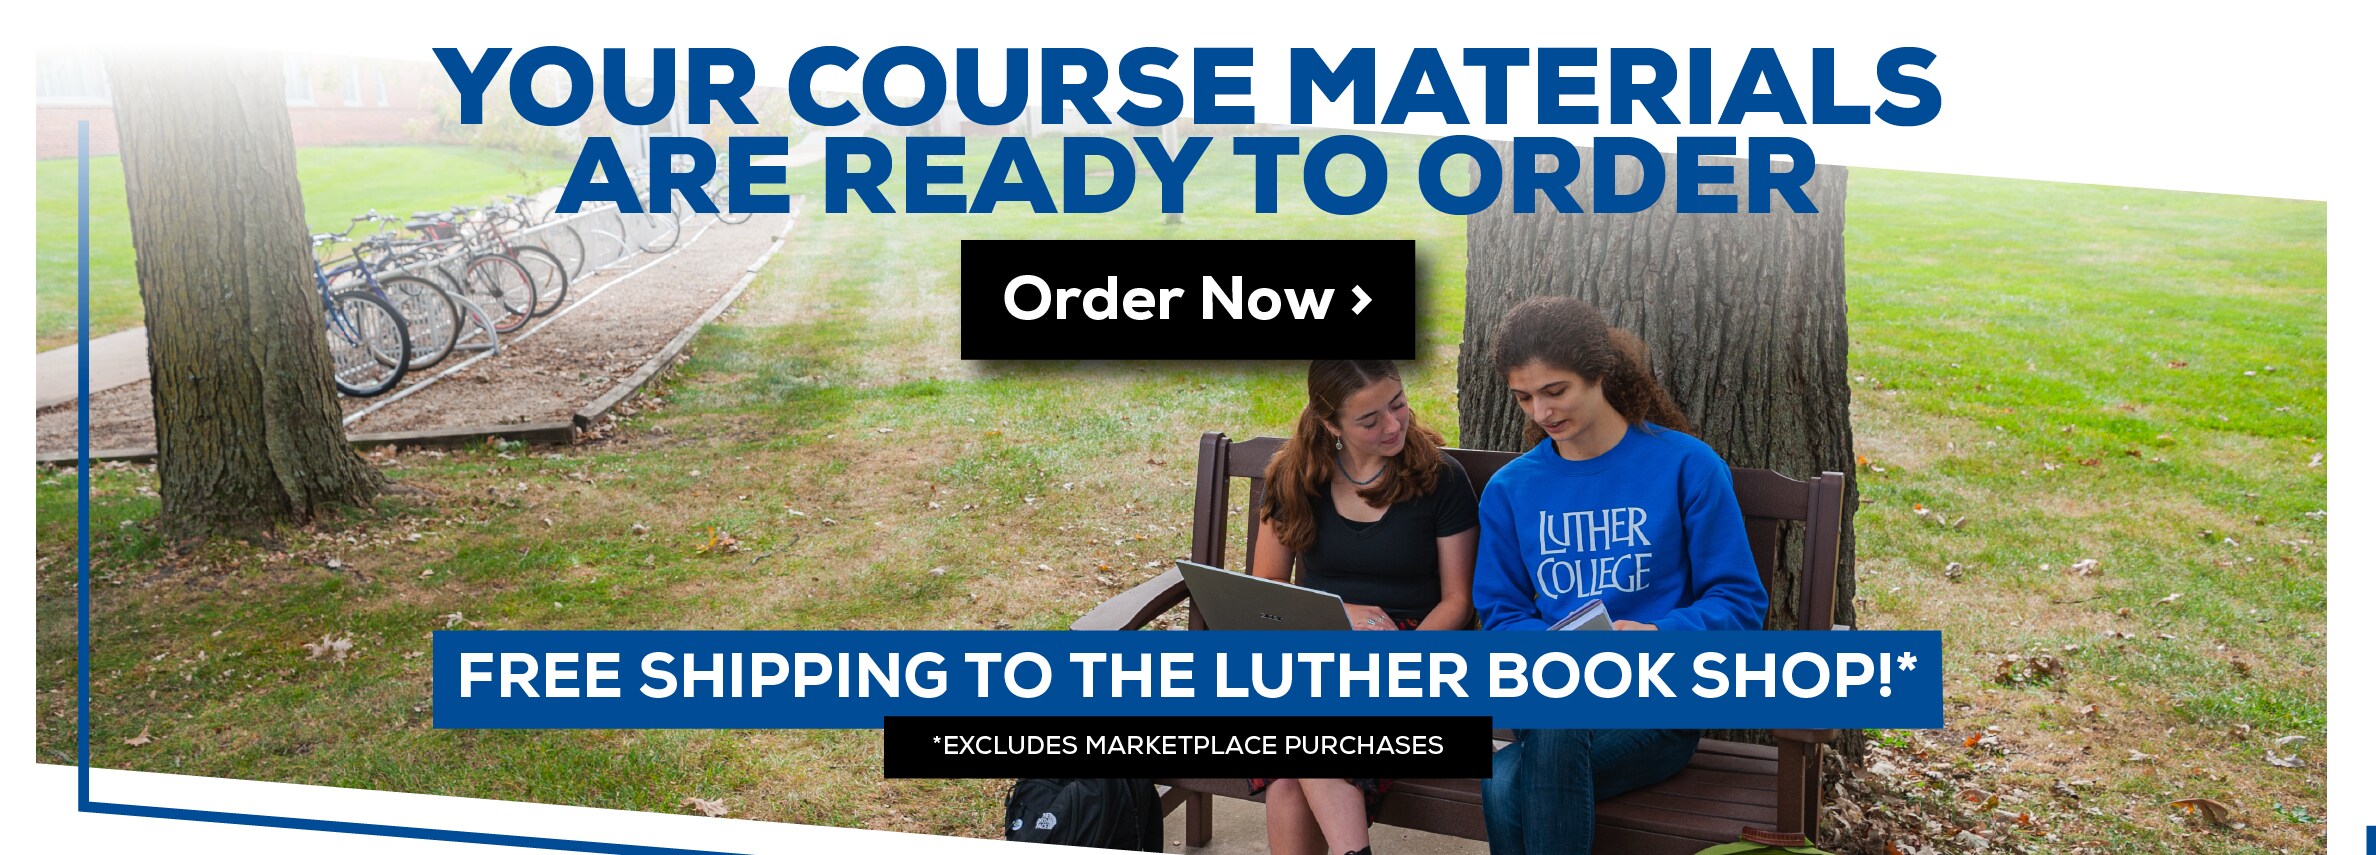 Your Course Materials are Ready to Order! Order Now. Free shipping to the Luther Book Shop!* *Excludes Marketplace Purchases